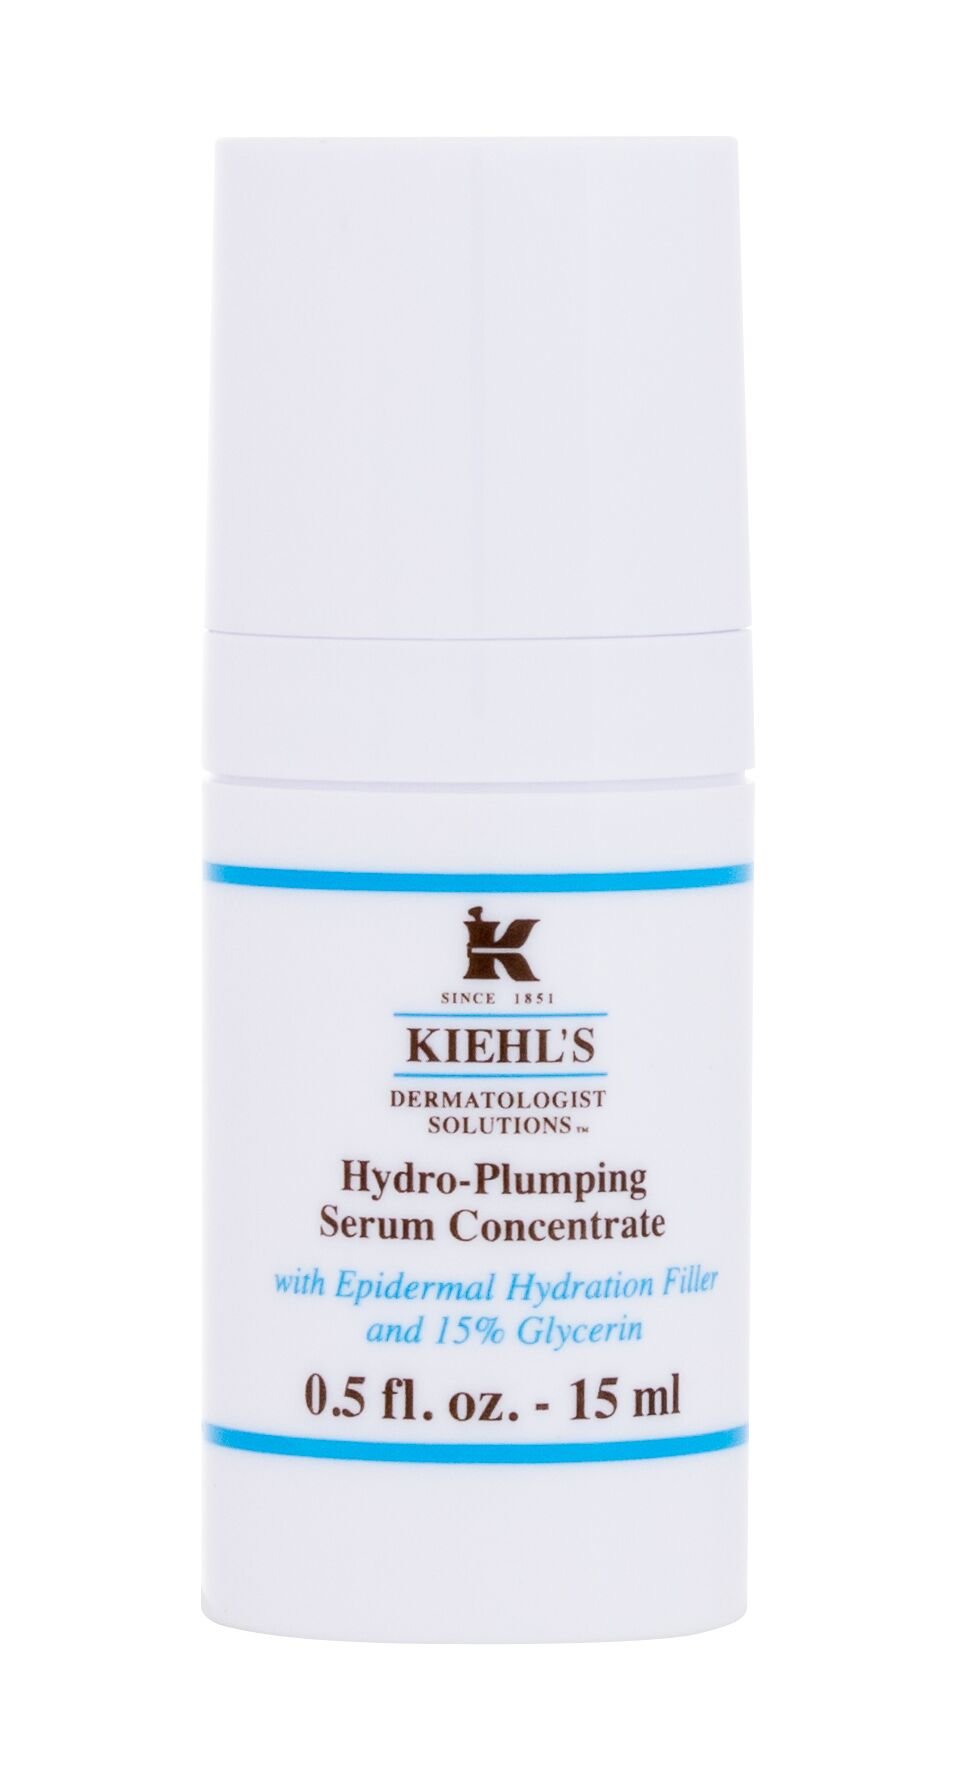 Kiehl´s Dermatologist Solutions Hydro-Plumping Serum Concentrate